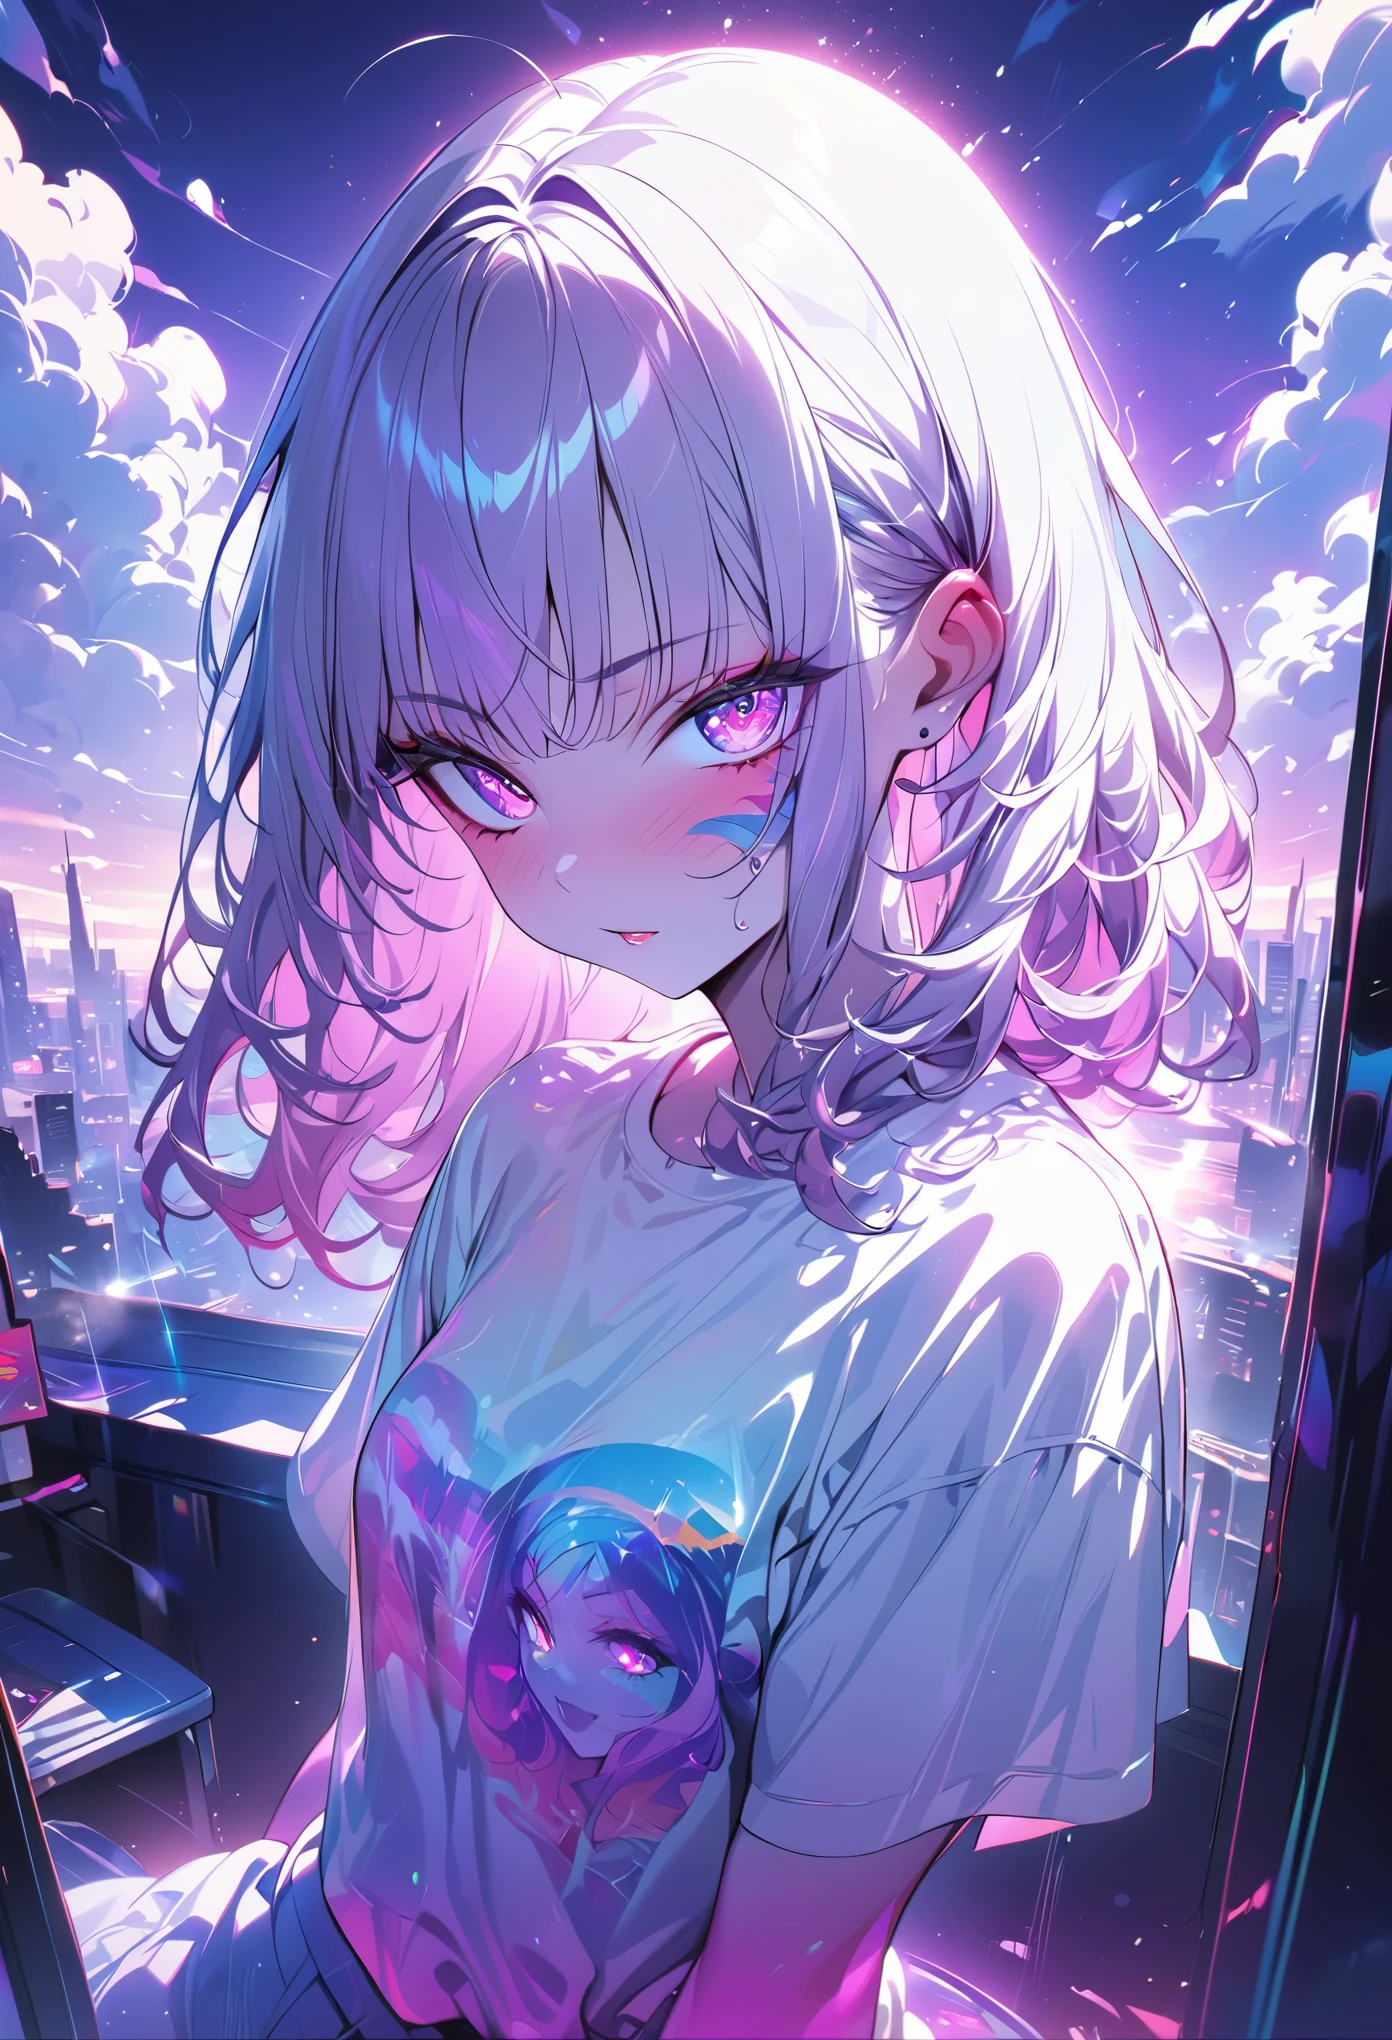 1 girl, Colorful theme, synthwave sky,(best quality, high quality, High resolution), actual, Super detailed, Highly detailed facial features, Ridiculous,  actual lighting and reflections, Highly detailed facial features, see through shirt, best photos,high quality illustration